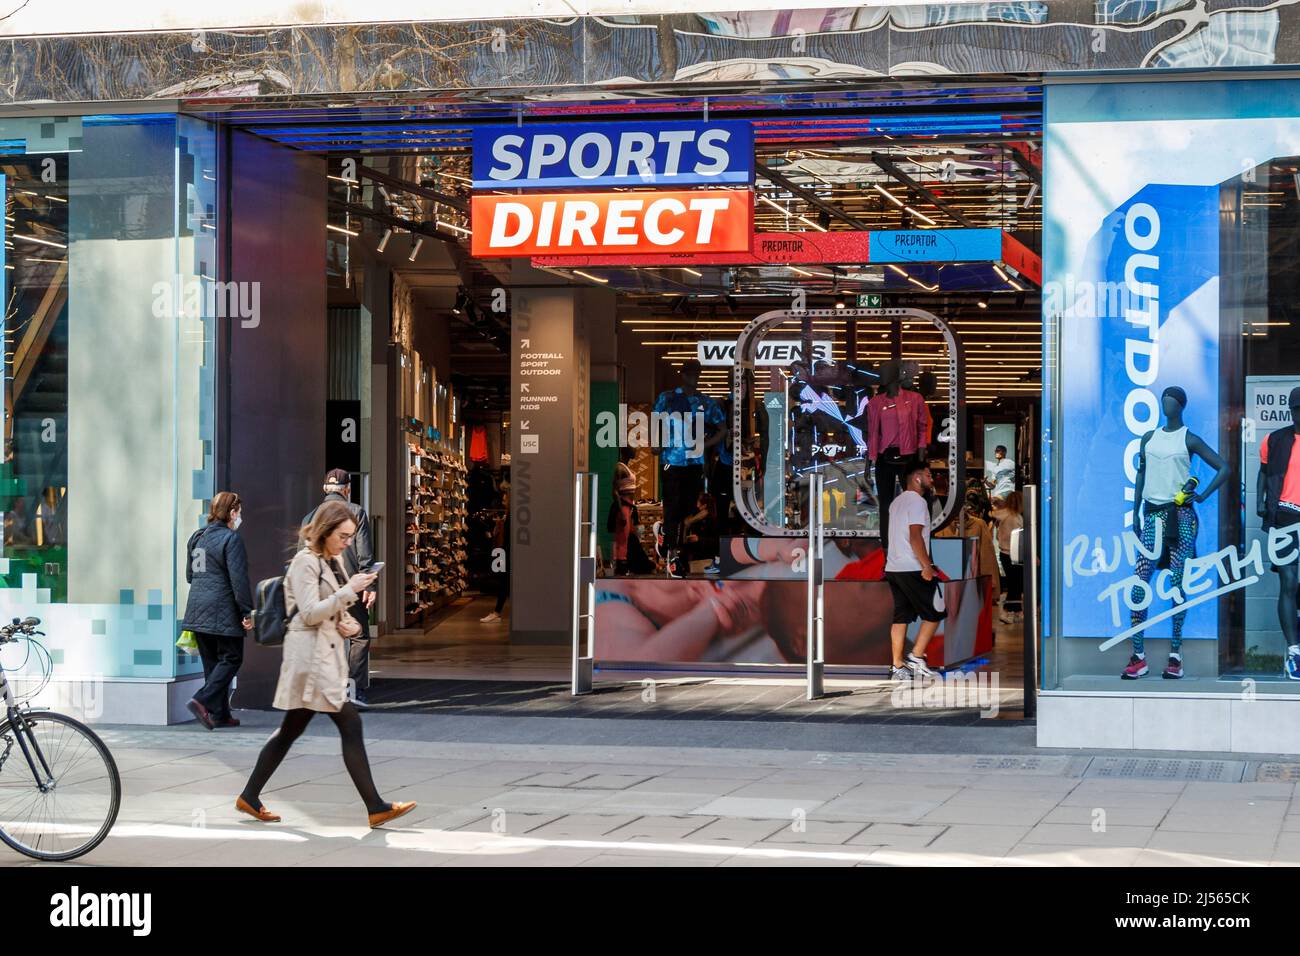 A branch of Sports Direct, a retail sports clothing and equipment store, on Oxford Street, London, UK Stock Photo